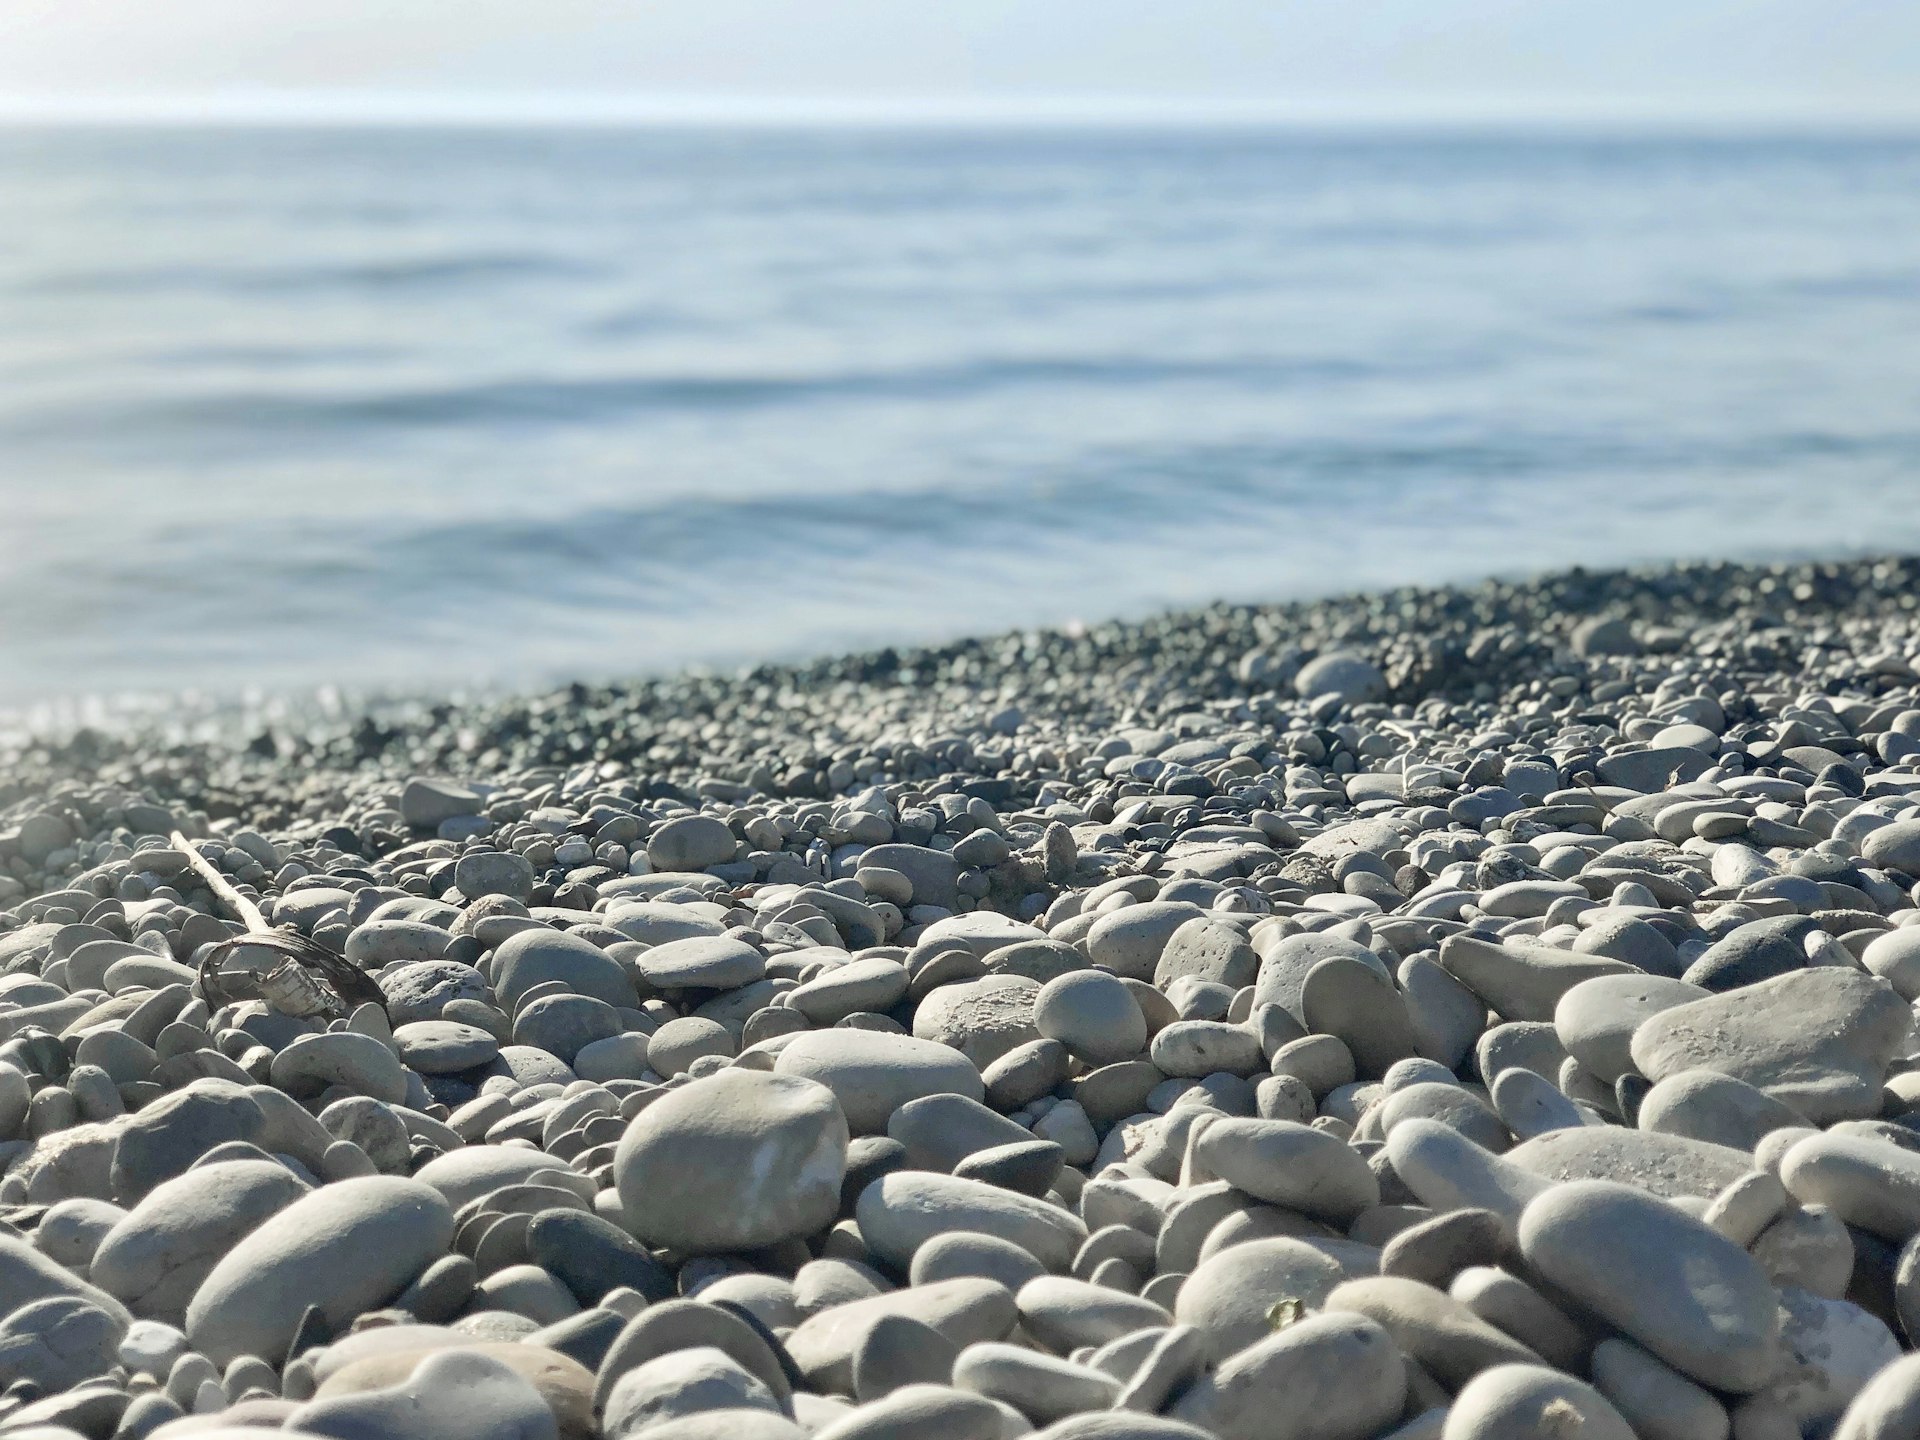 Closeup on smooth stones at Empire Beach in Michigan with waves in the distance